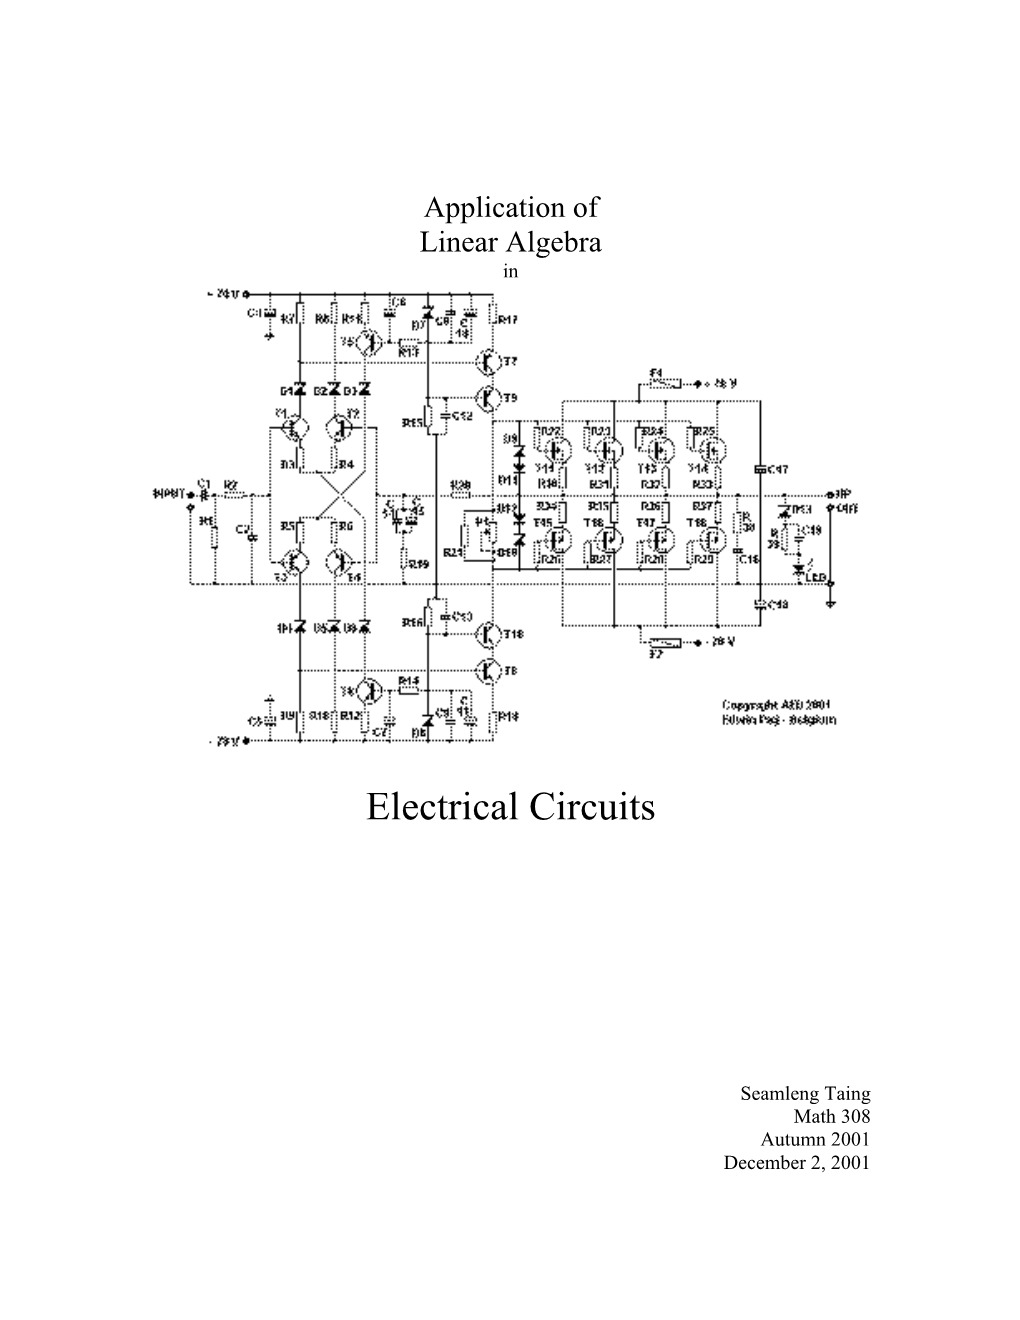 Applications of Linear Algebra in Electrical Circuits